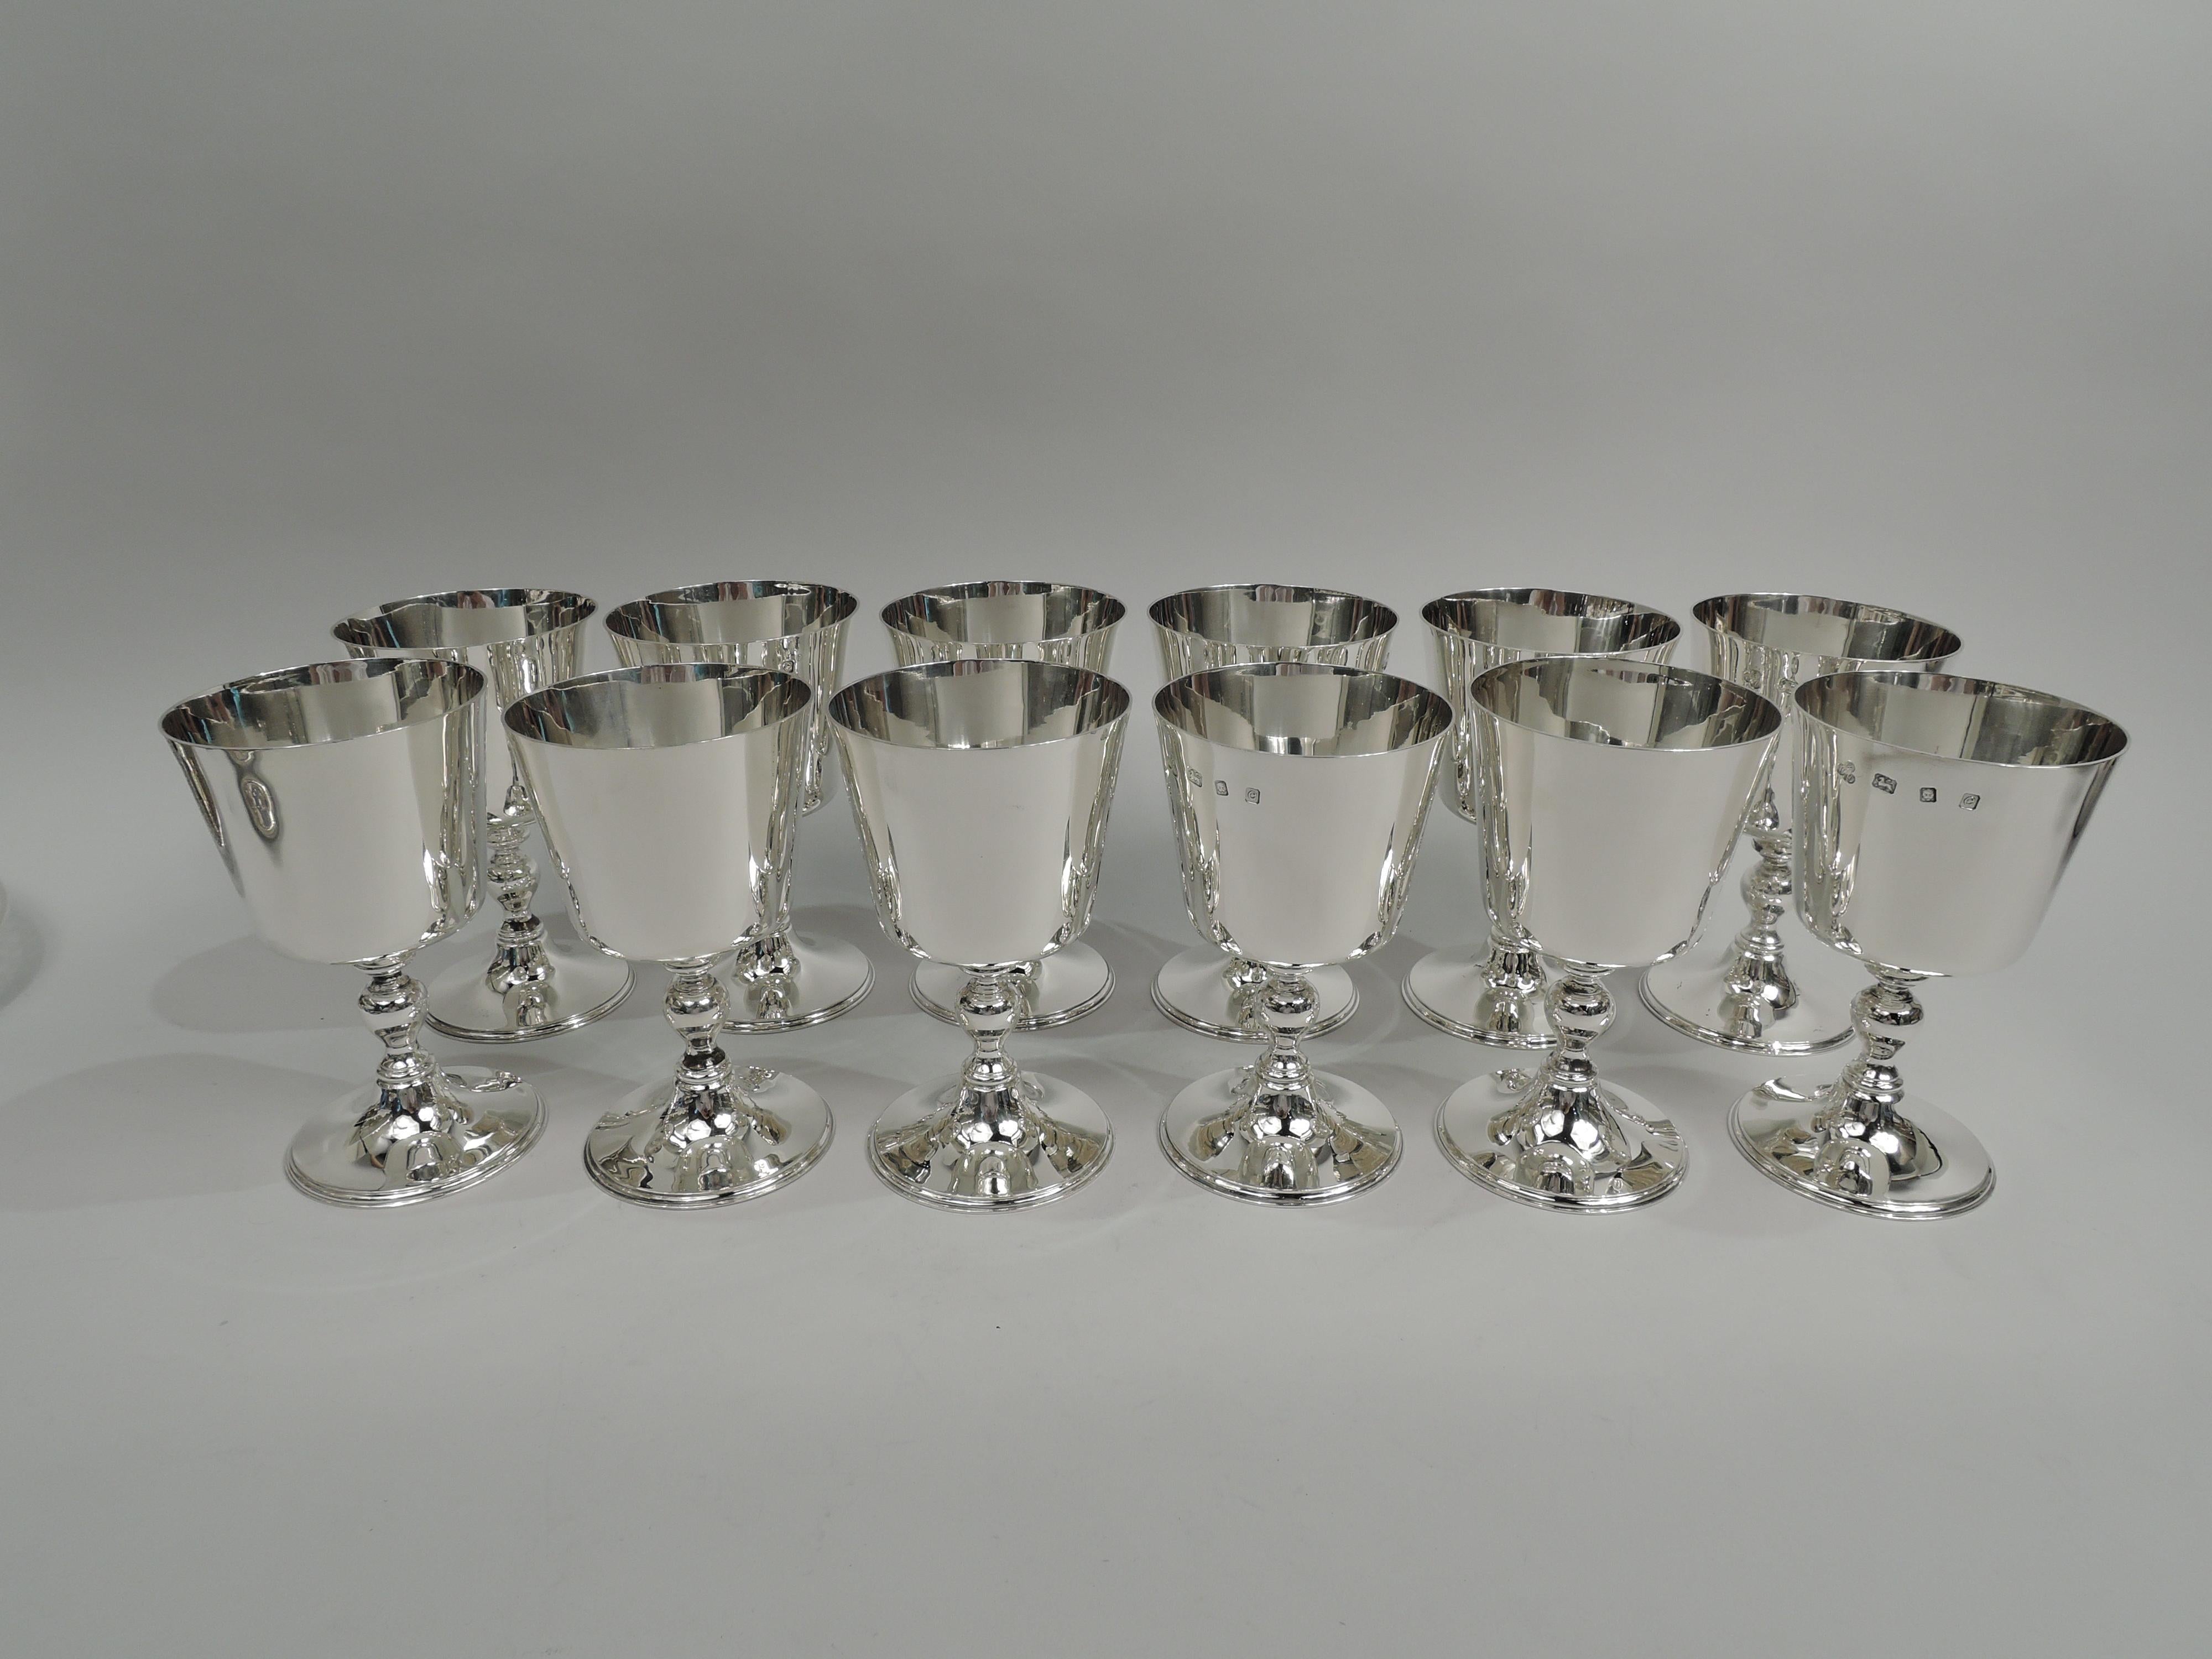 Set of 12 traditional sterling silver goblets. Made by Wakely & Wheeler in London in 1960. Each: Flat-bottomed bowl with straight and tapering sides, baluster support, and raised round foot. Festive with nice proportions and balance. Fully marked.